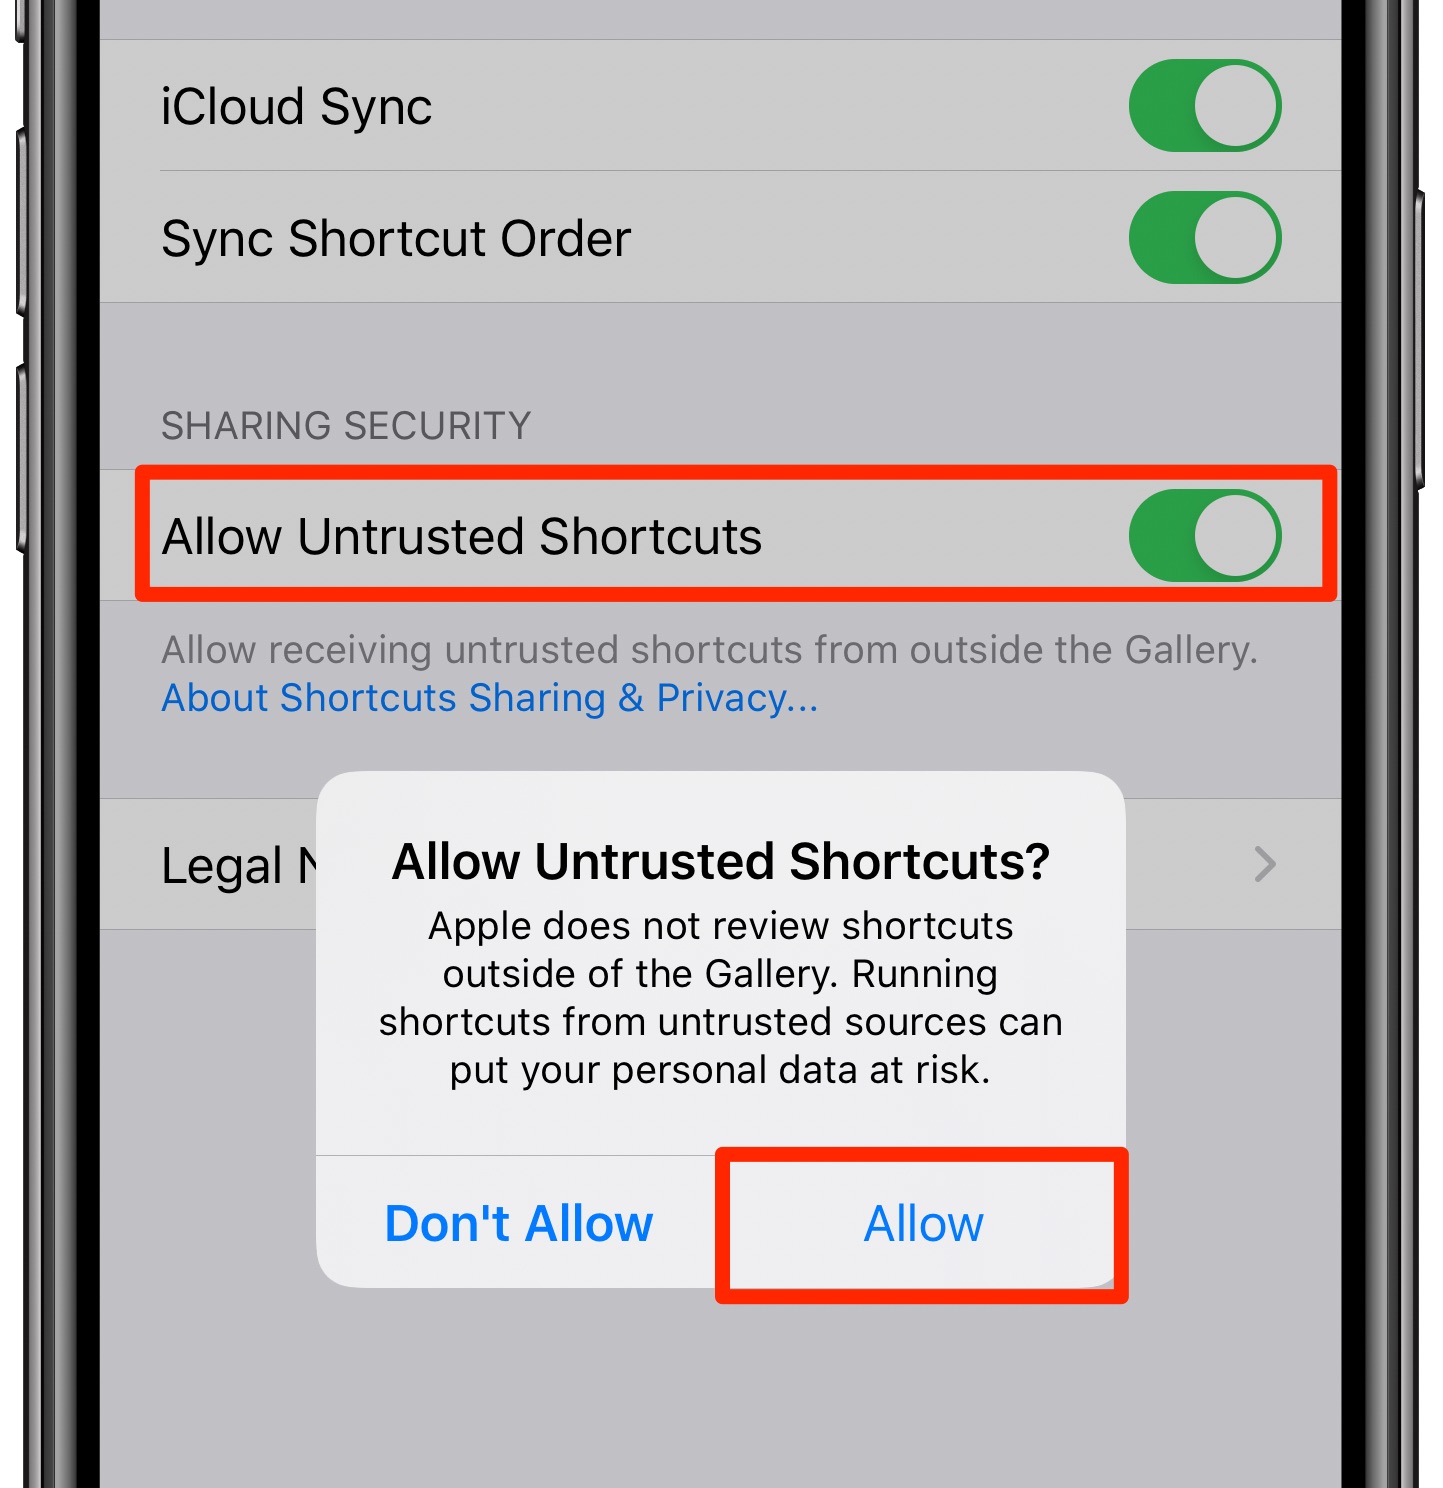 change iPhone wallpaper automatically - allow untrusted shortcuts